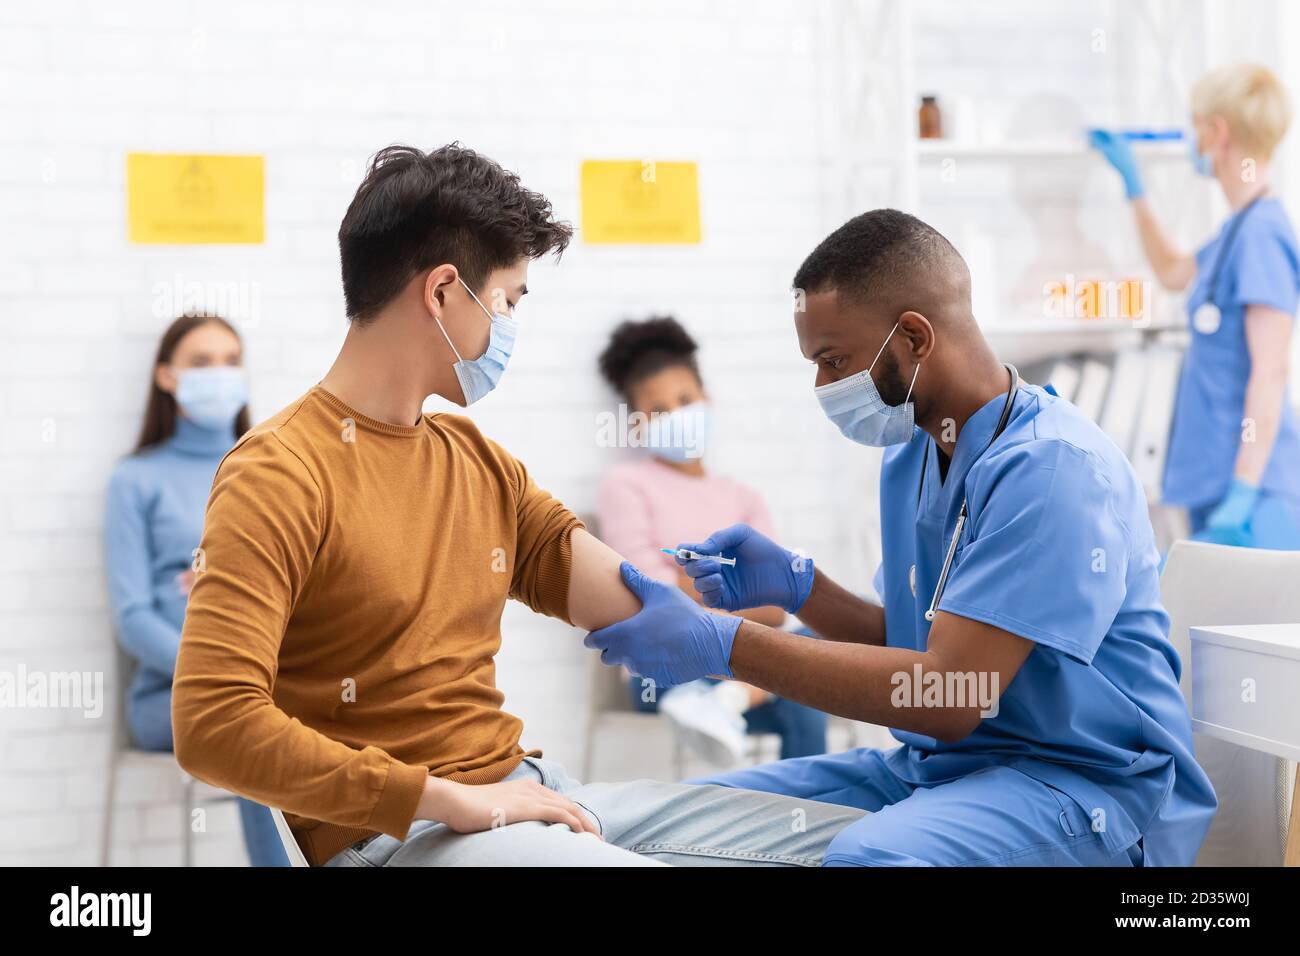 Doctor Vaccinating Asian Male Patient Giving Covid-19 Vaccine In Hospital Stock Photo